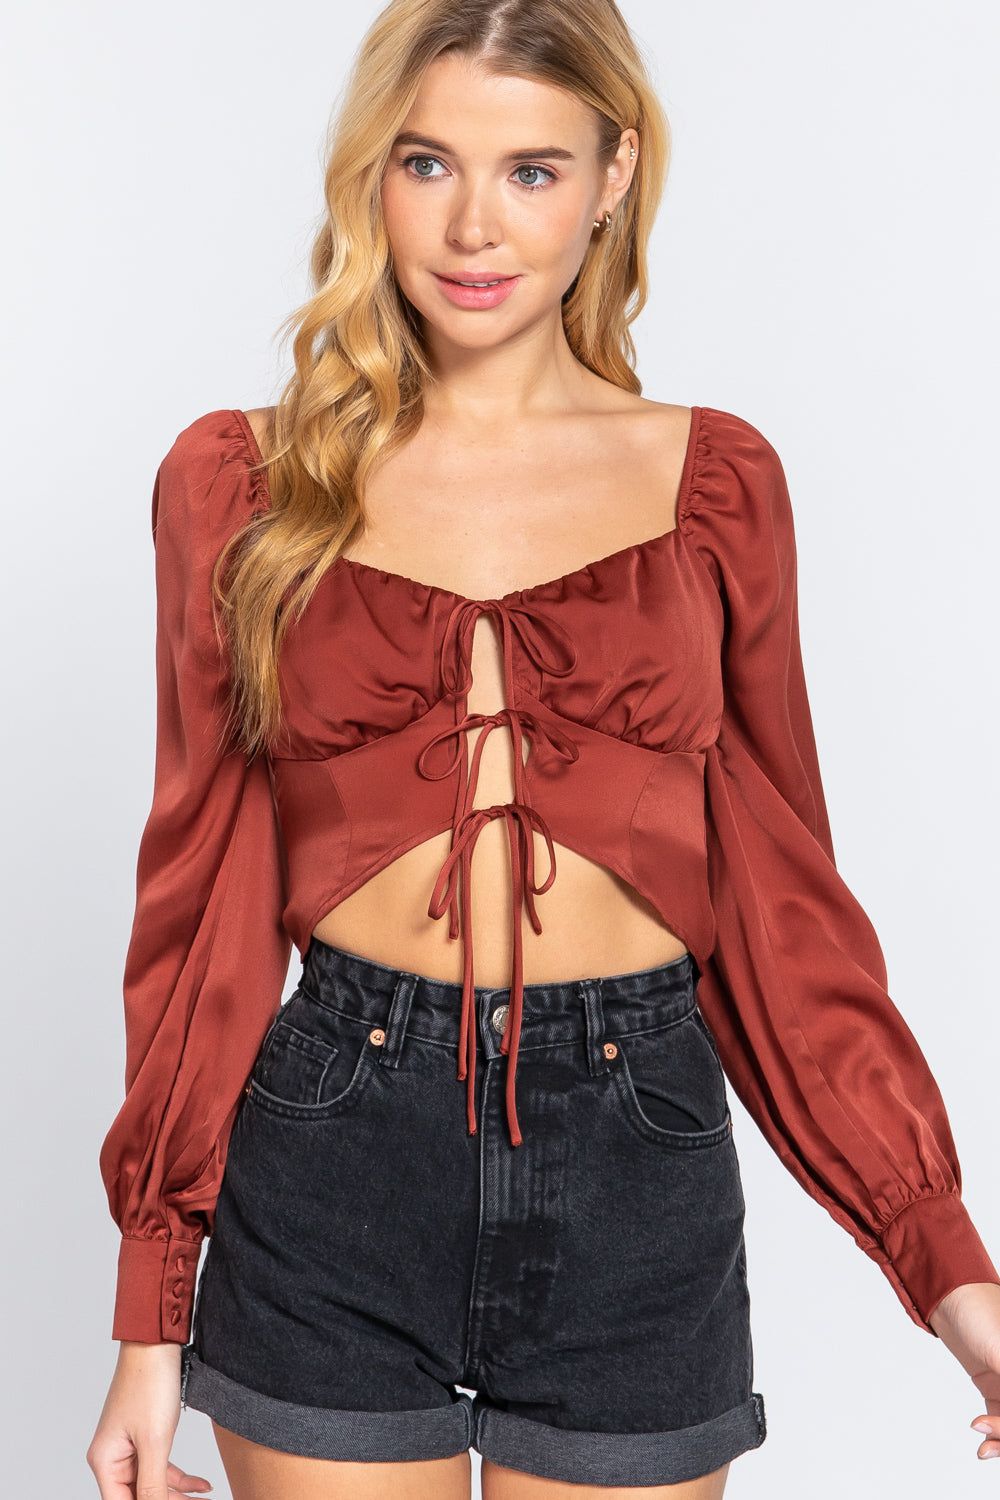 Long Sleeve Sweetheart Neck Front Ribbon Tie Detail Woven Top | us.meeeshop